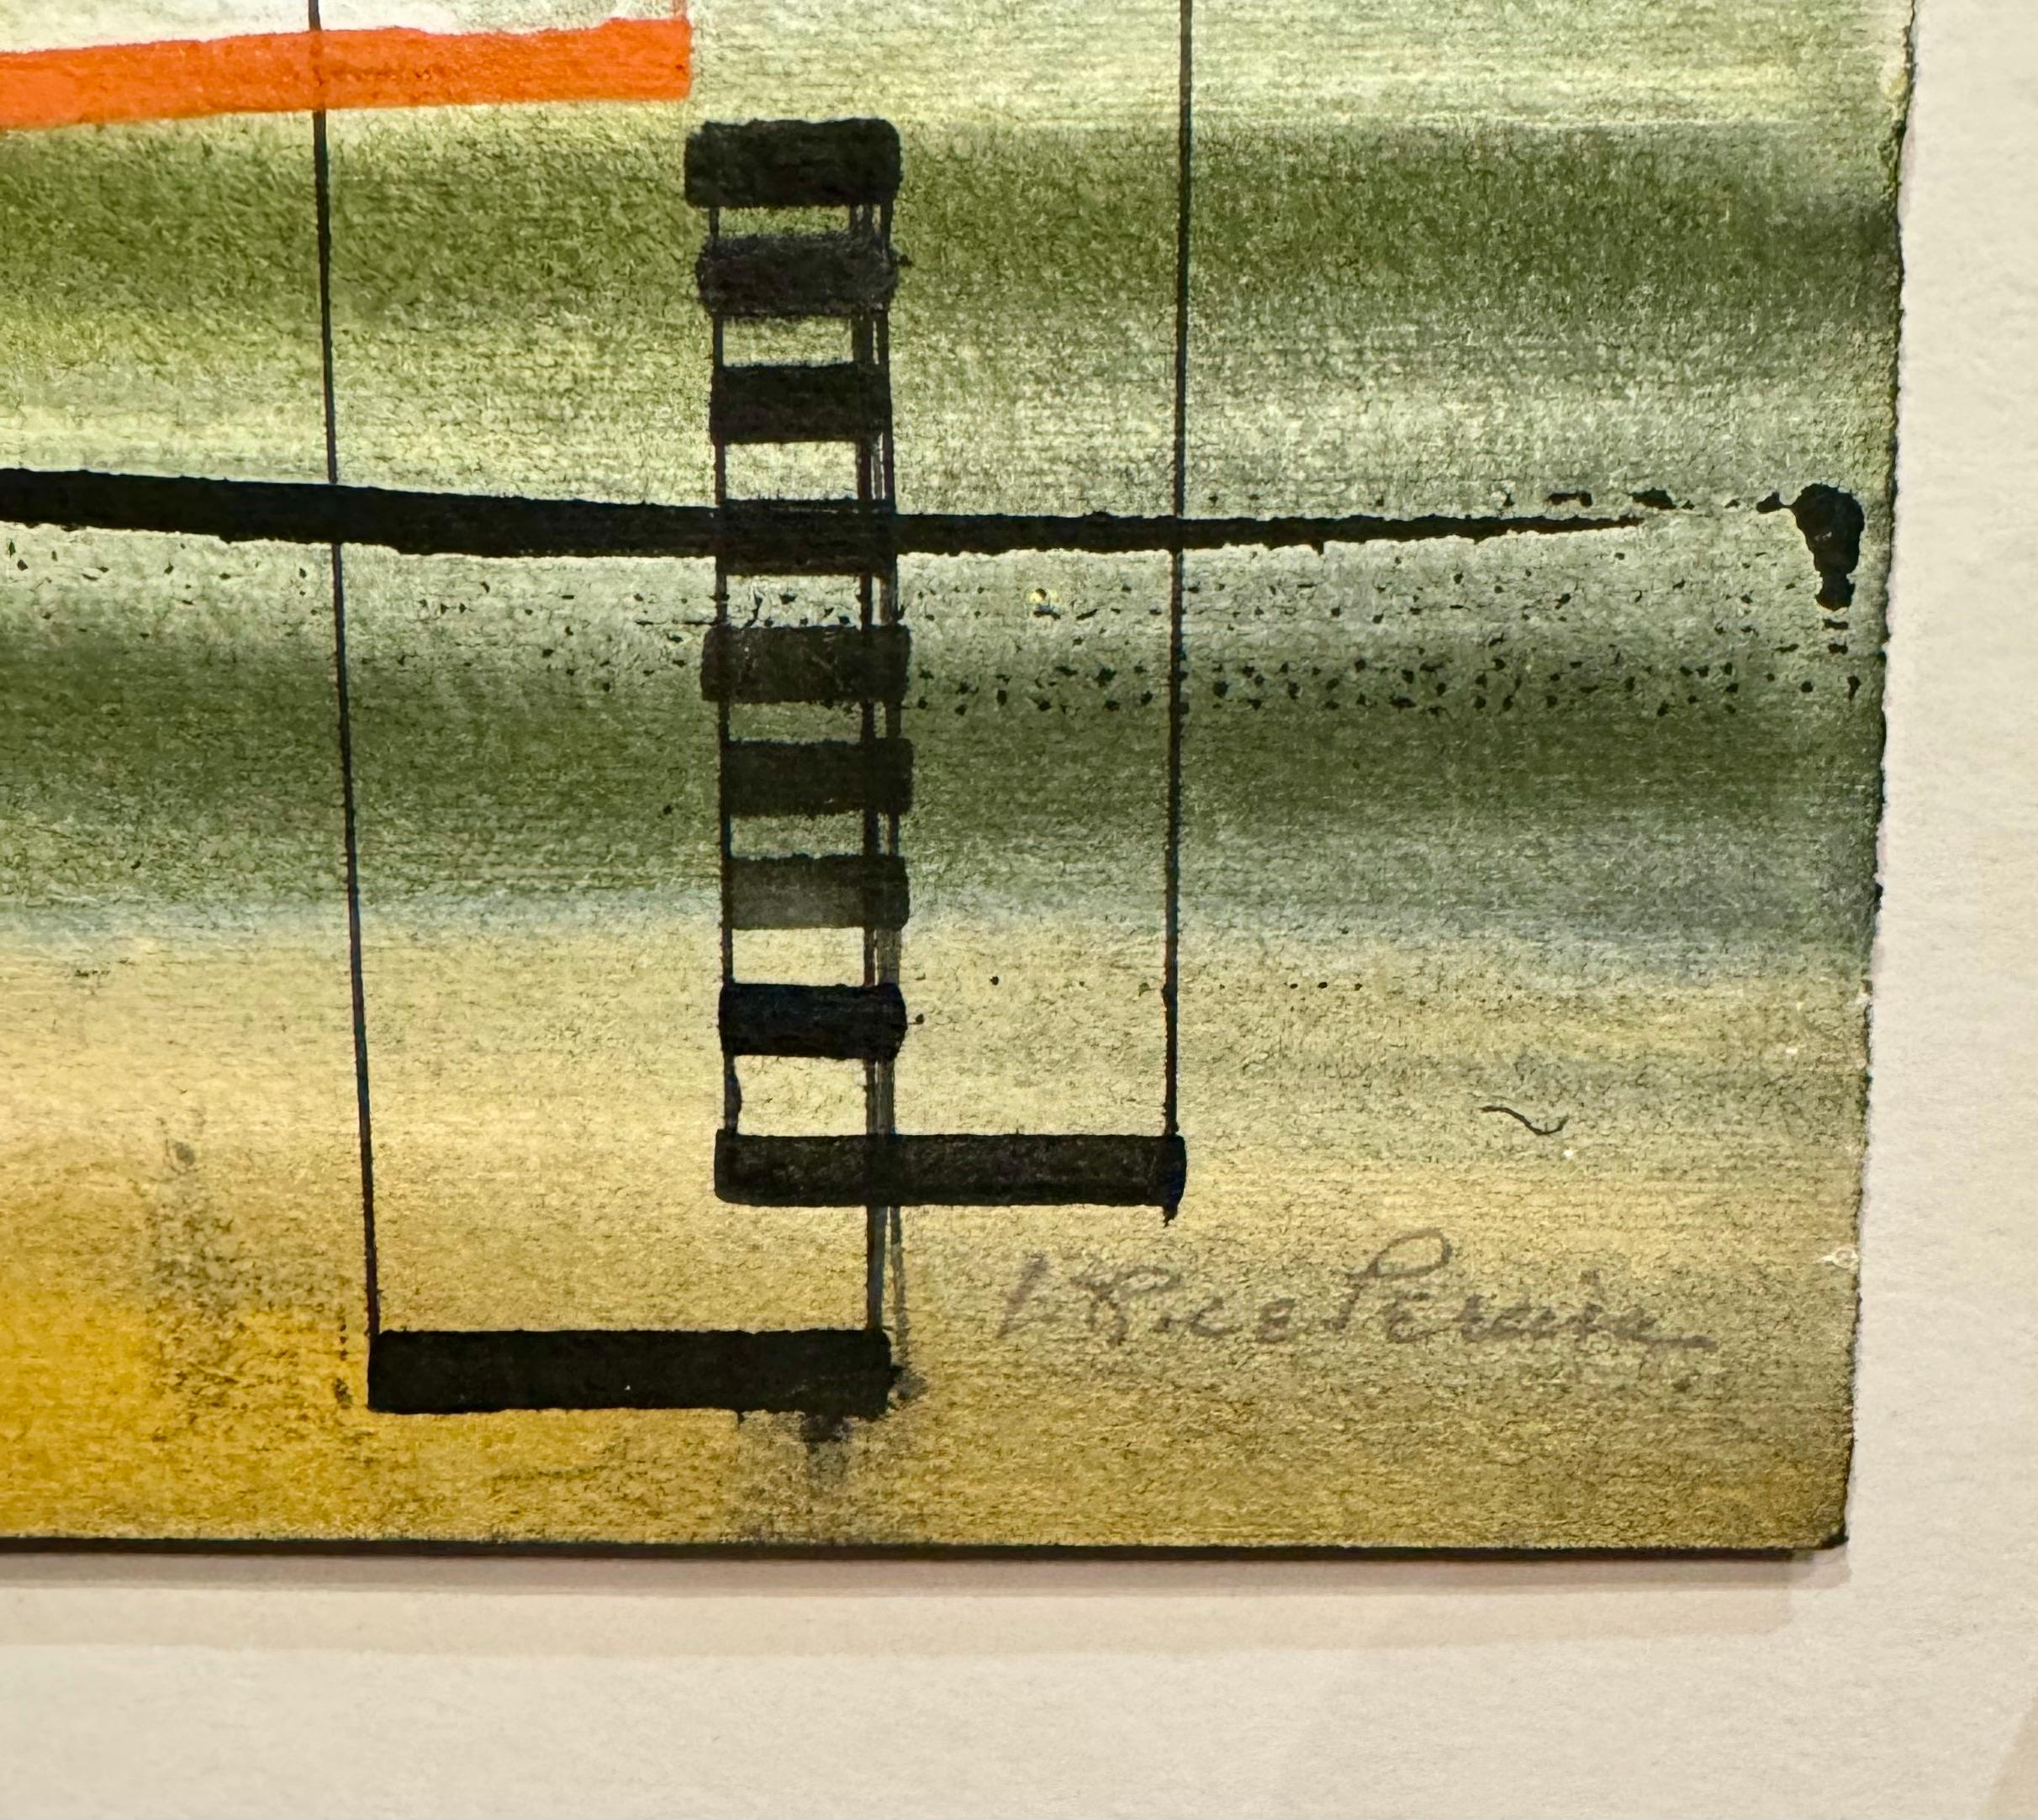 ABSTRACT American Woman Abstract Non-objective Mid 20th Century Modern Drawing

Irene Rice Pereira (1902-1971)
Abstract
12 x 6 1/2 inches
Watercolor, gouache, and ink on black paper
Signed lower right

BIO
Born Irene Rice, she took the name of her